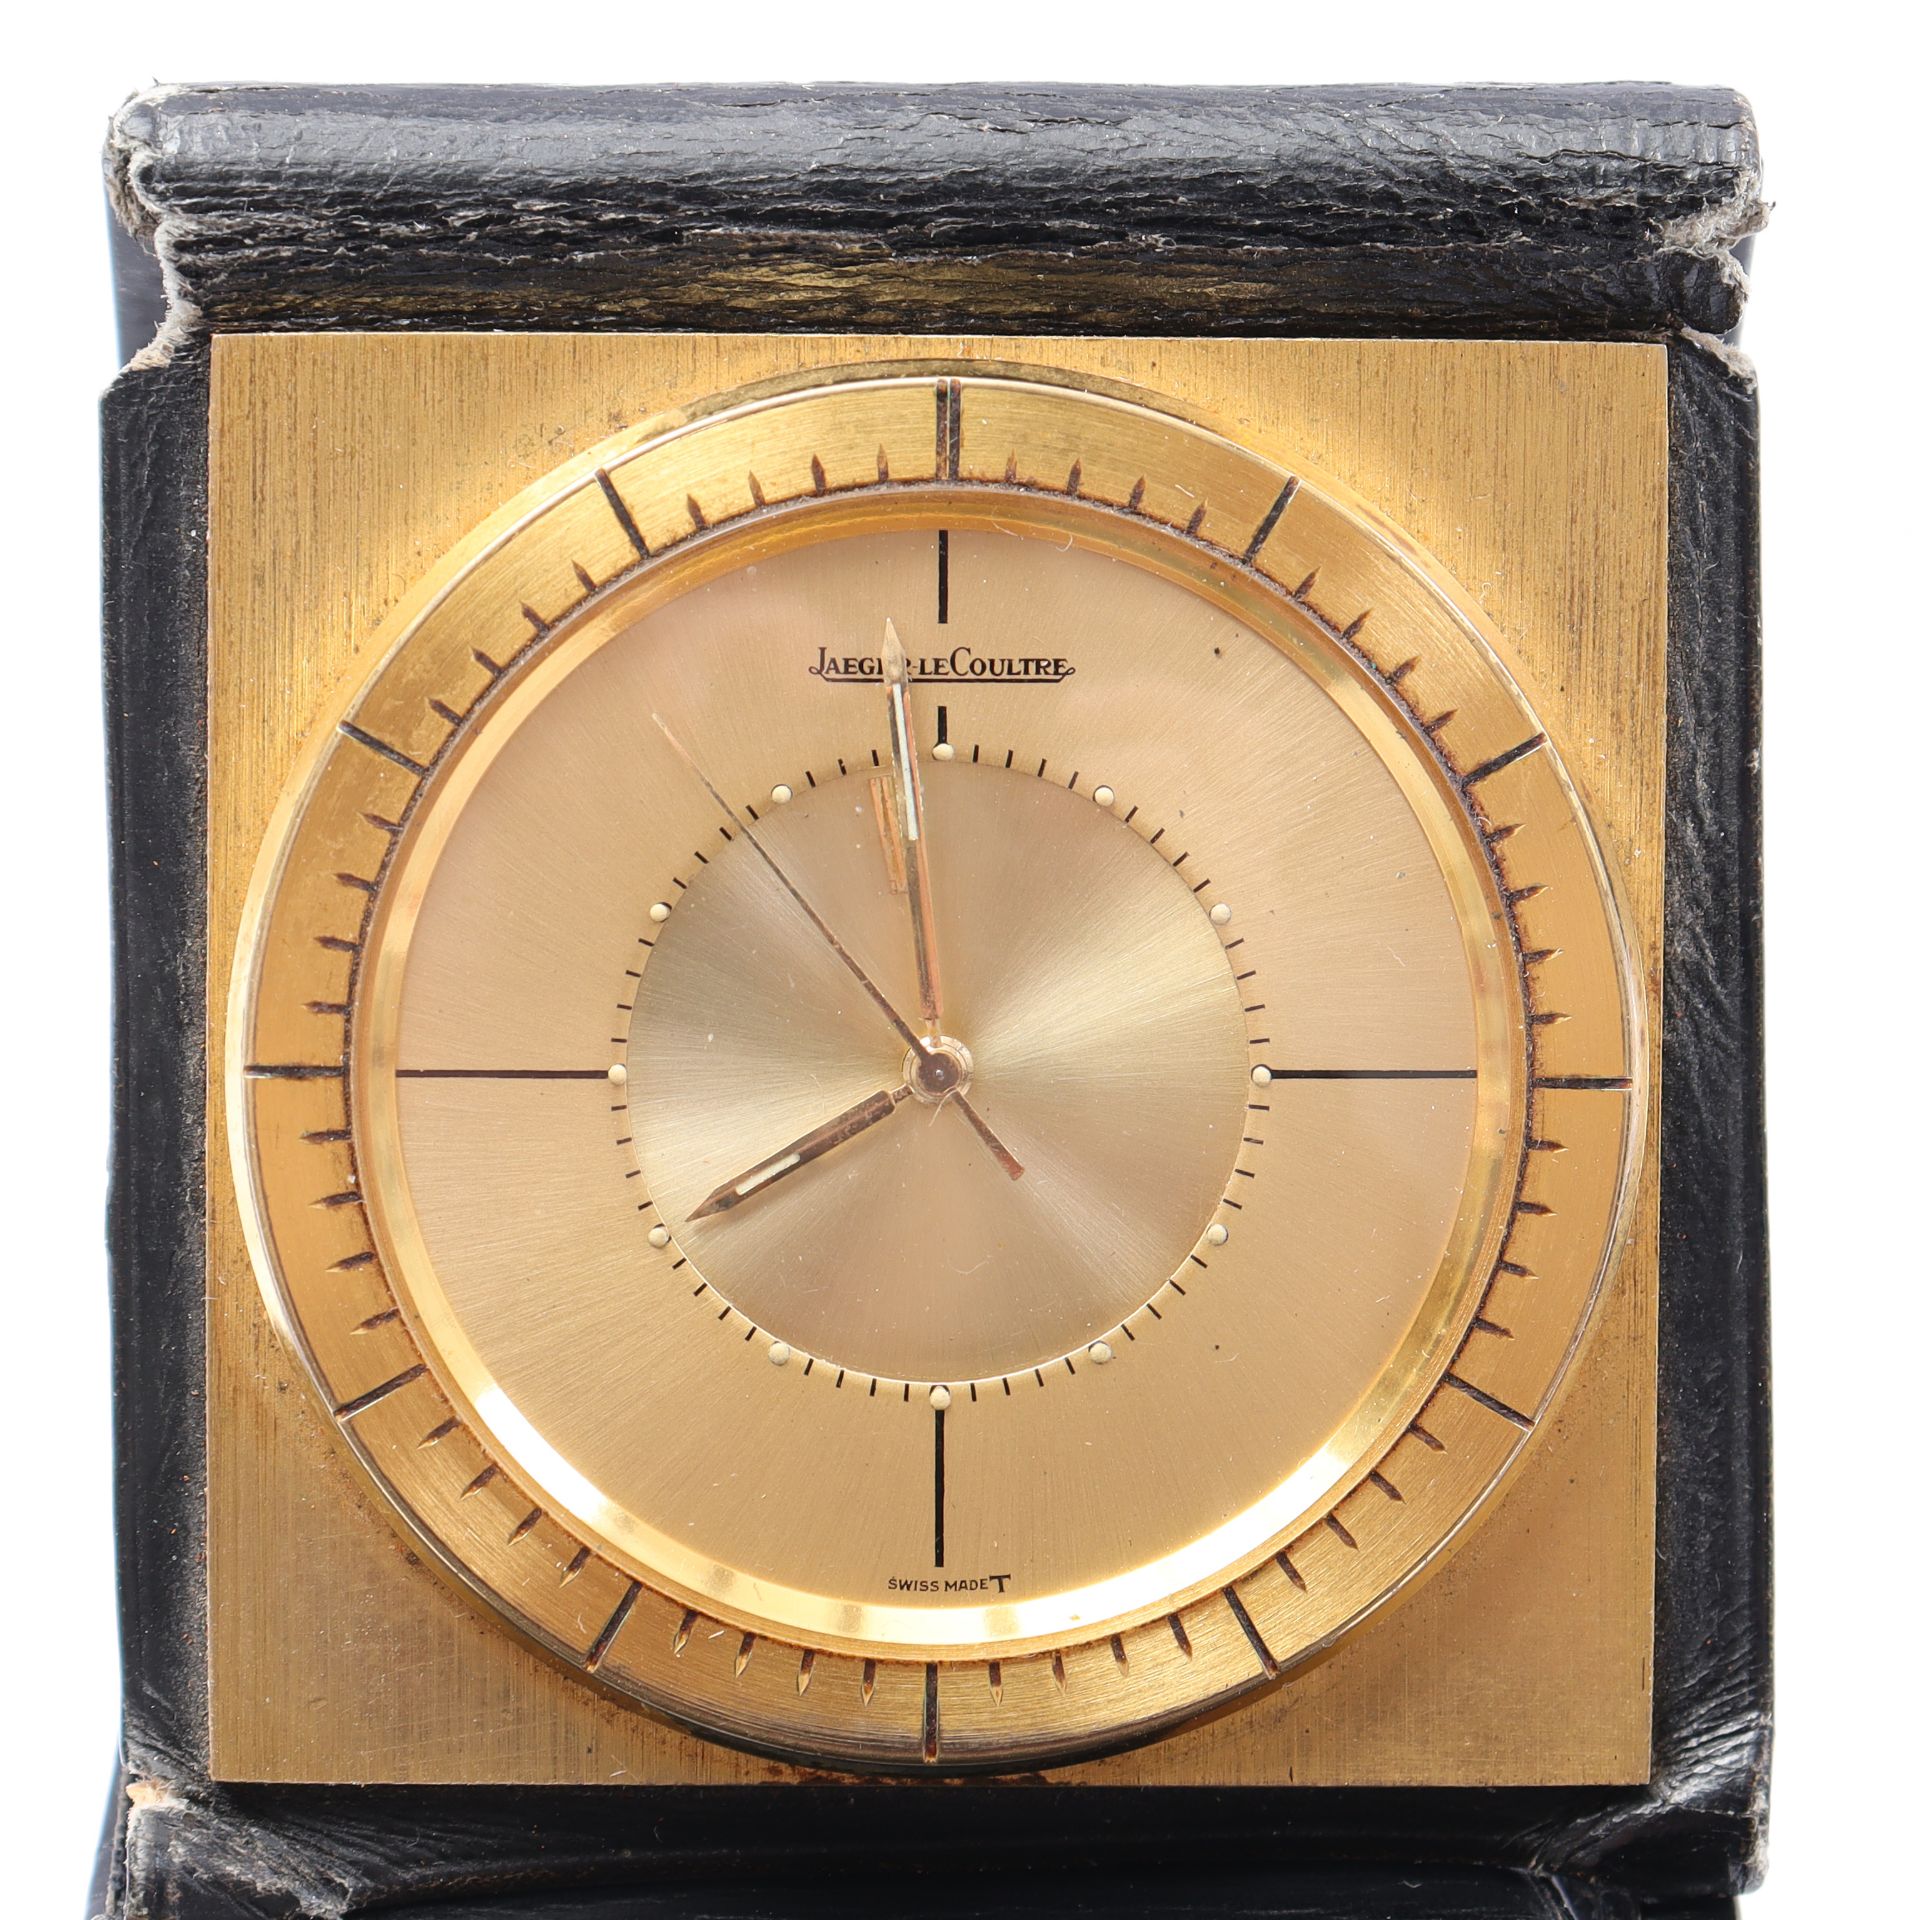 Jaeger LeCoultre Memovox travel alarm clock in leather case - Image 2 of 2